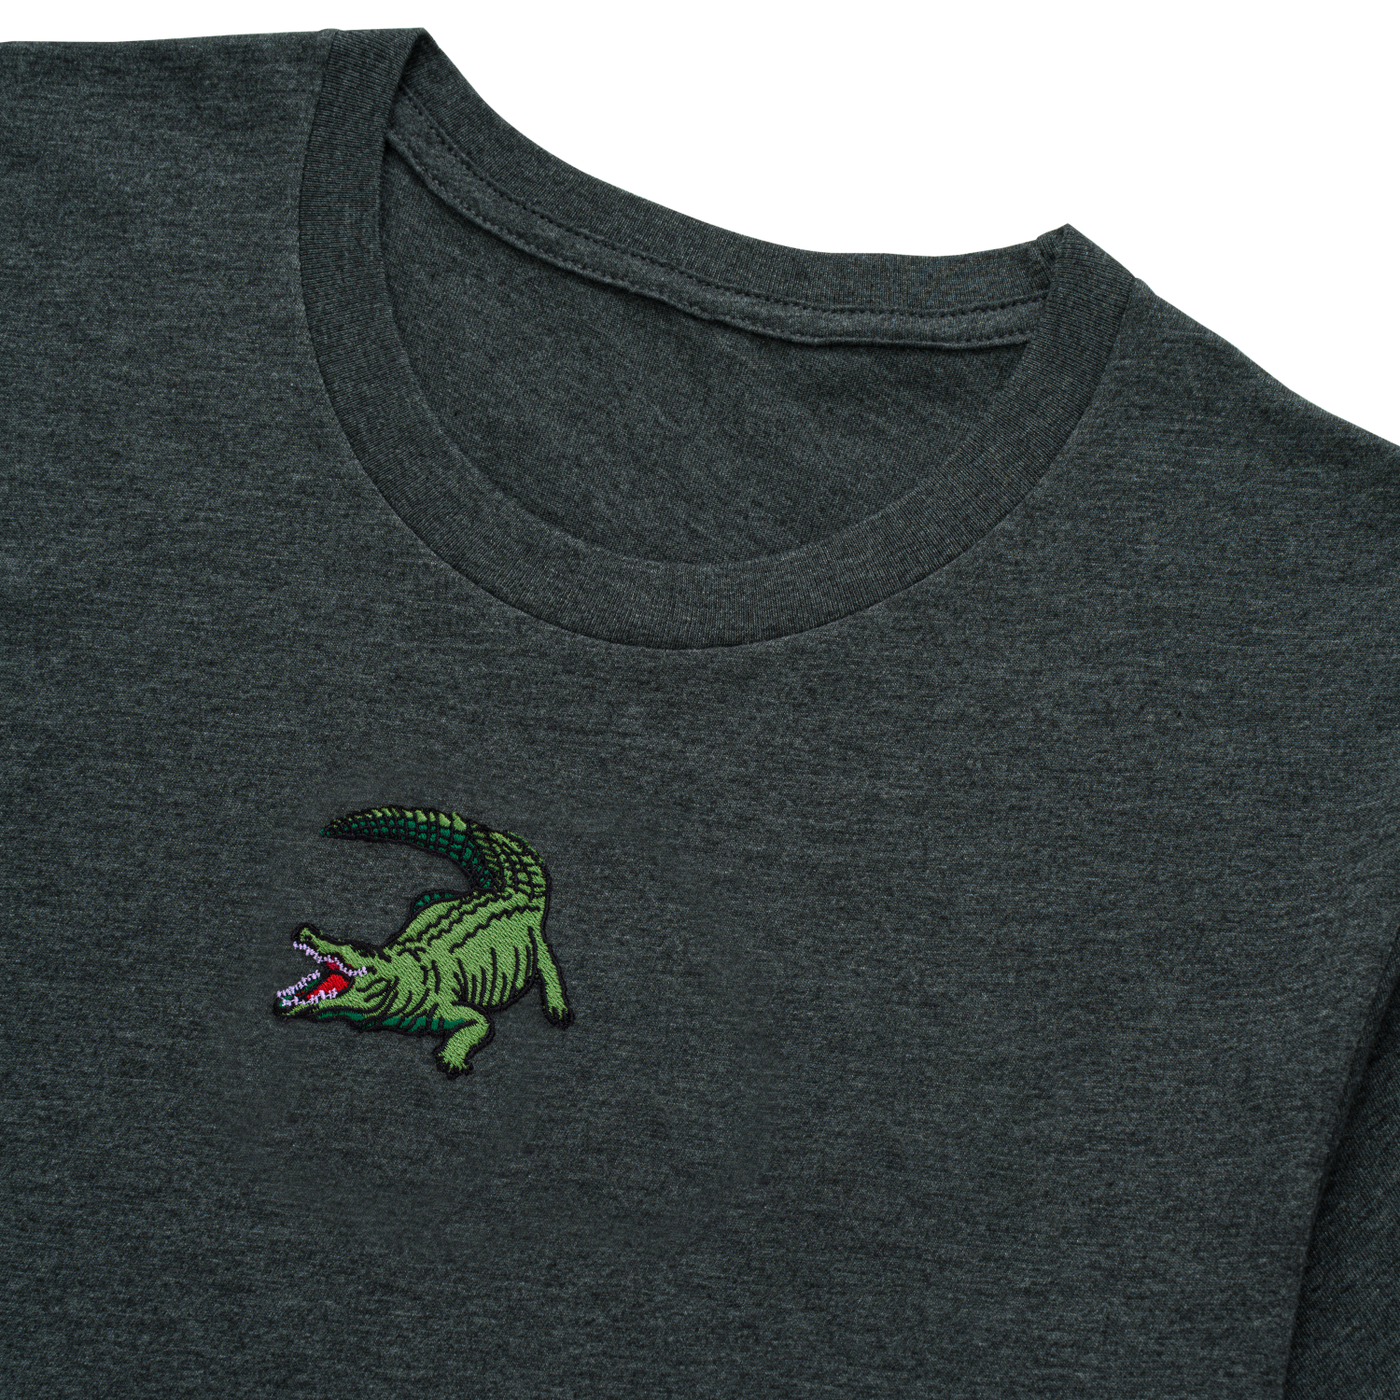 Bobby's Planet Men's Embroidered Saltwater Crocodile T-Shirt from Australia Down Under Animals Collection in Dark Grey Heather Color#color_dark-grey-heather